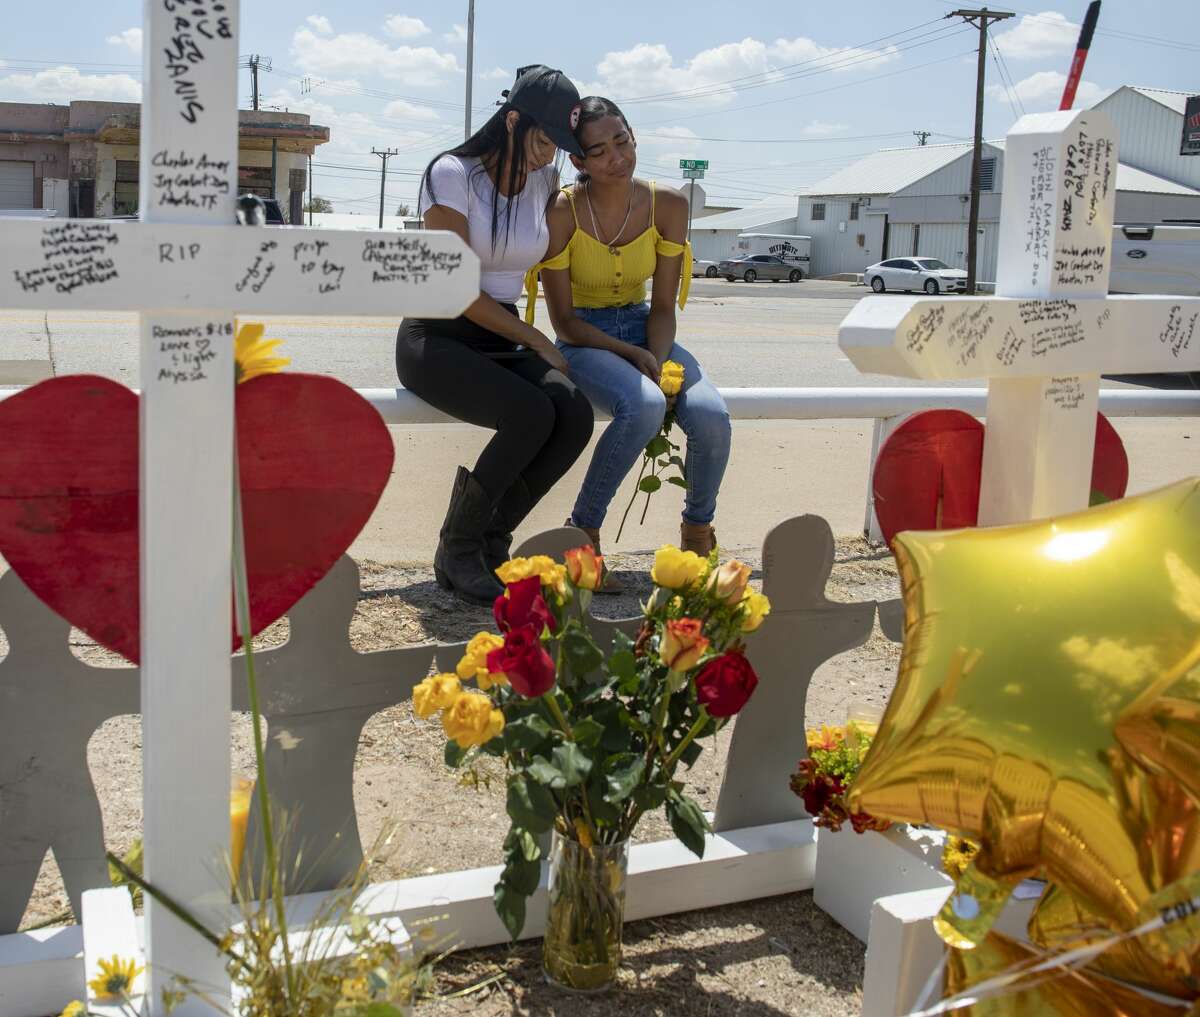 Kimberly Juarez and her mother, Lizeth Aguilar, mourn at white crosses, made by Greg Zanis from Illinois, that were placed on Tuesday, Sept. 3, 2019, at 2nd Street and Sam Houston Avenue in Odessa, Texas. Juarez's best friend, Leilah Hernandez, died in the mass shootings on Saturday, Aug. 31.